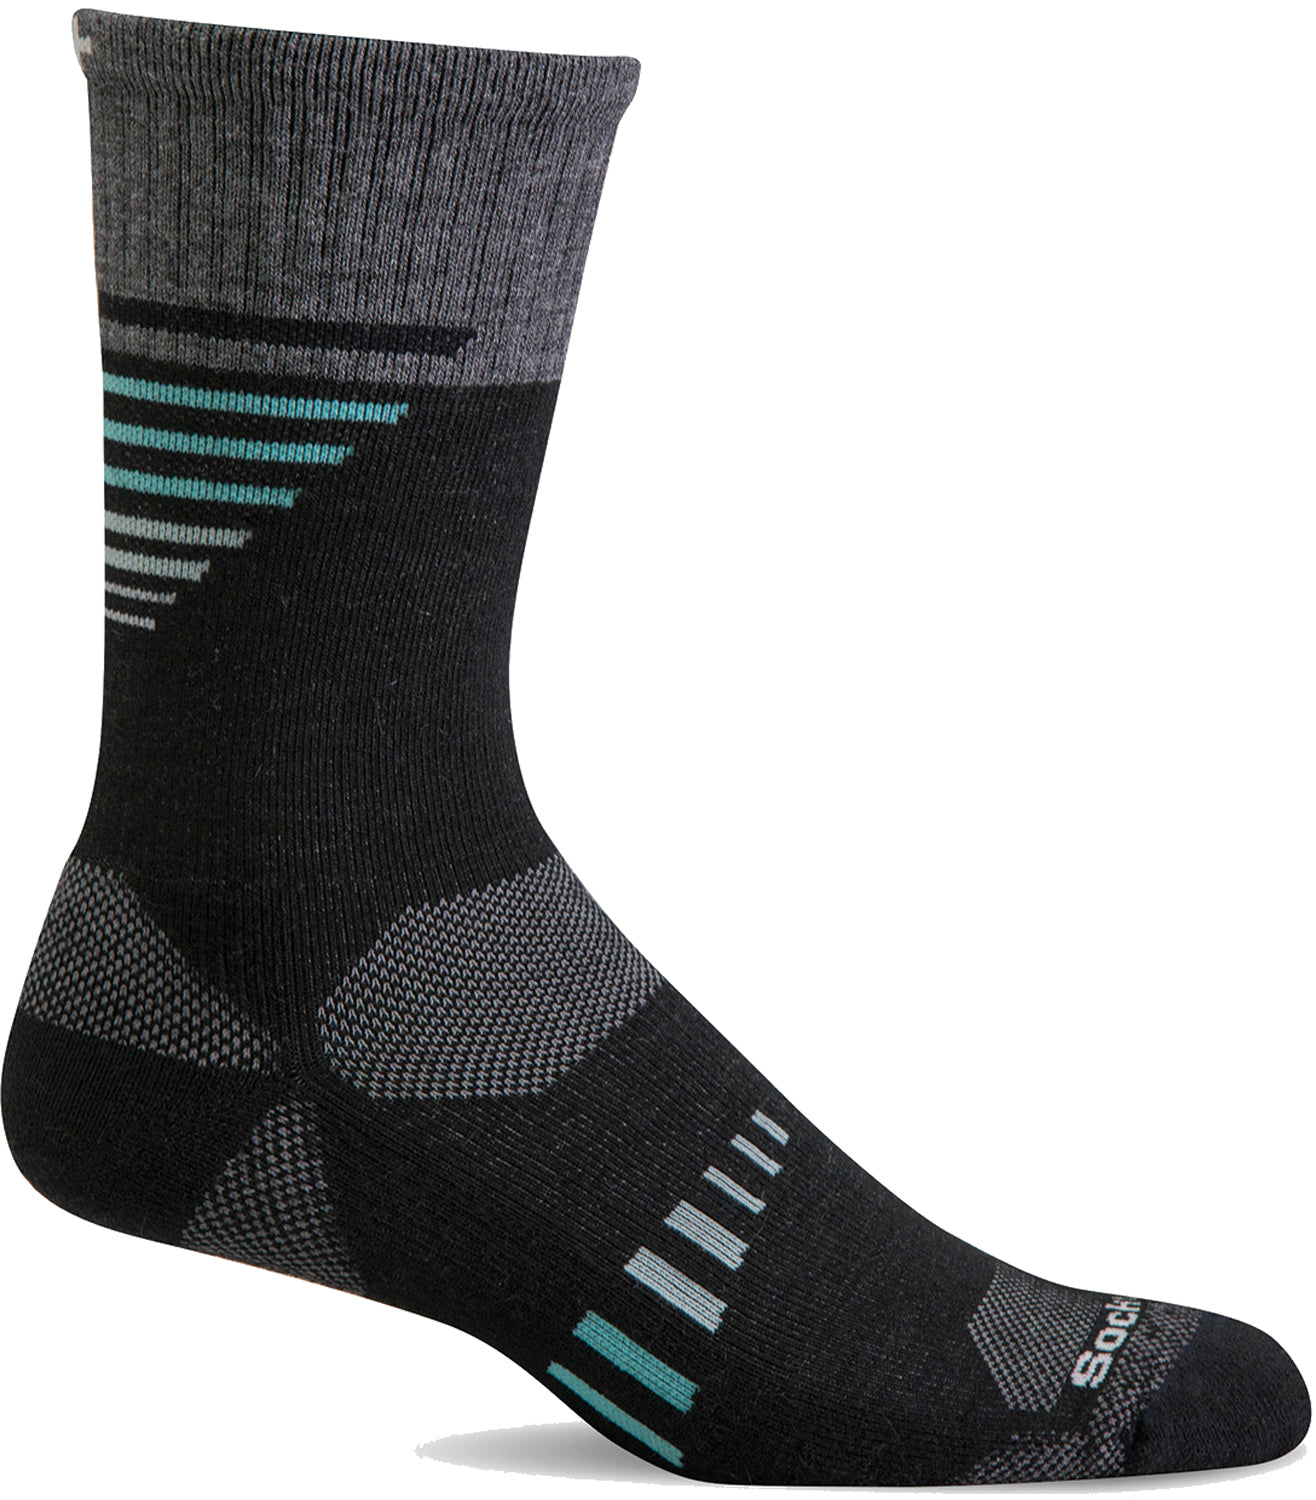 Sockwell Women's Ascend II Crew Moderate Graduated Compression Sock in Black color from the side